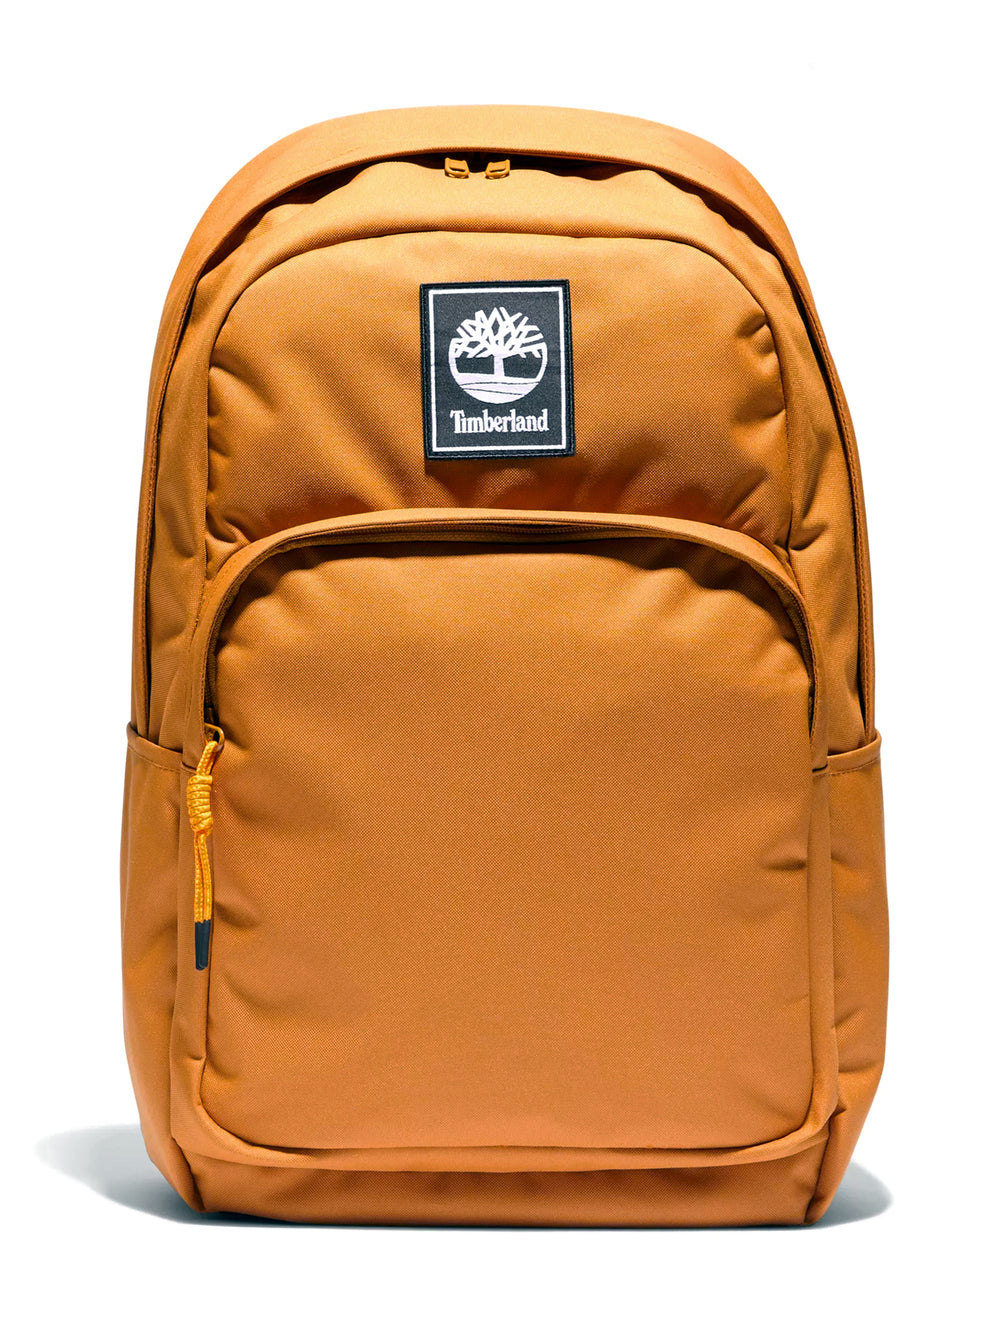 Backpack Timberland Logo Spicy Orange - Shop and Buy online